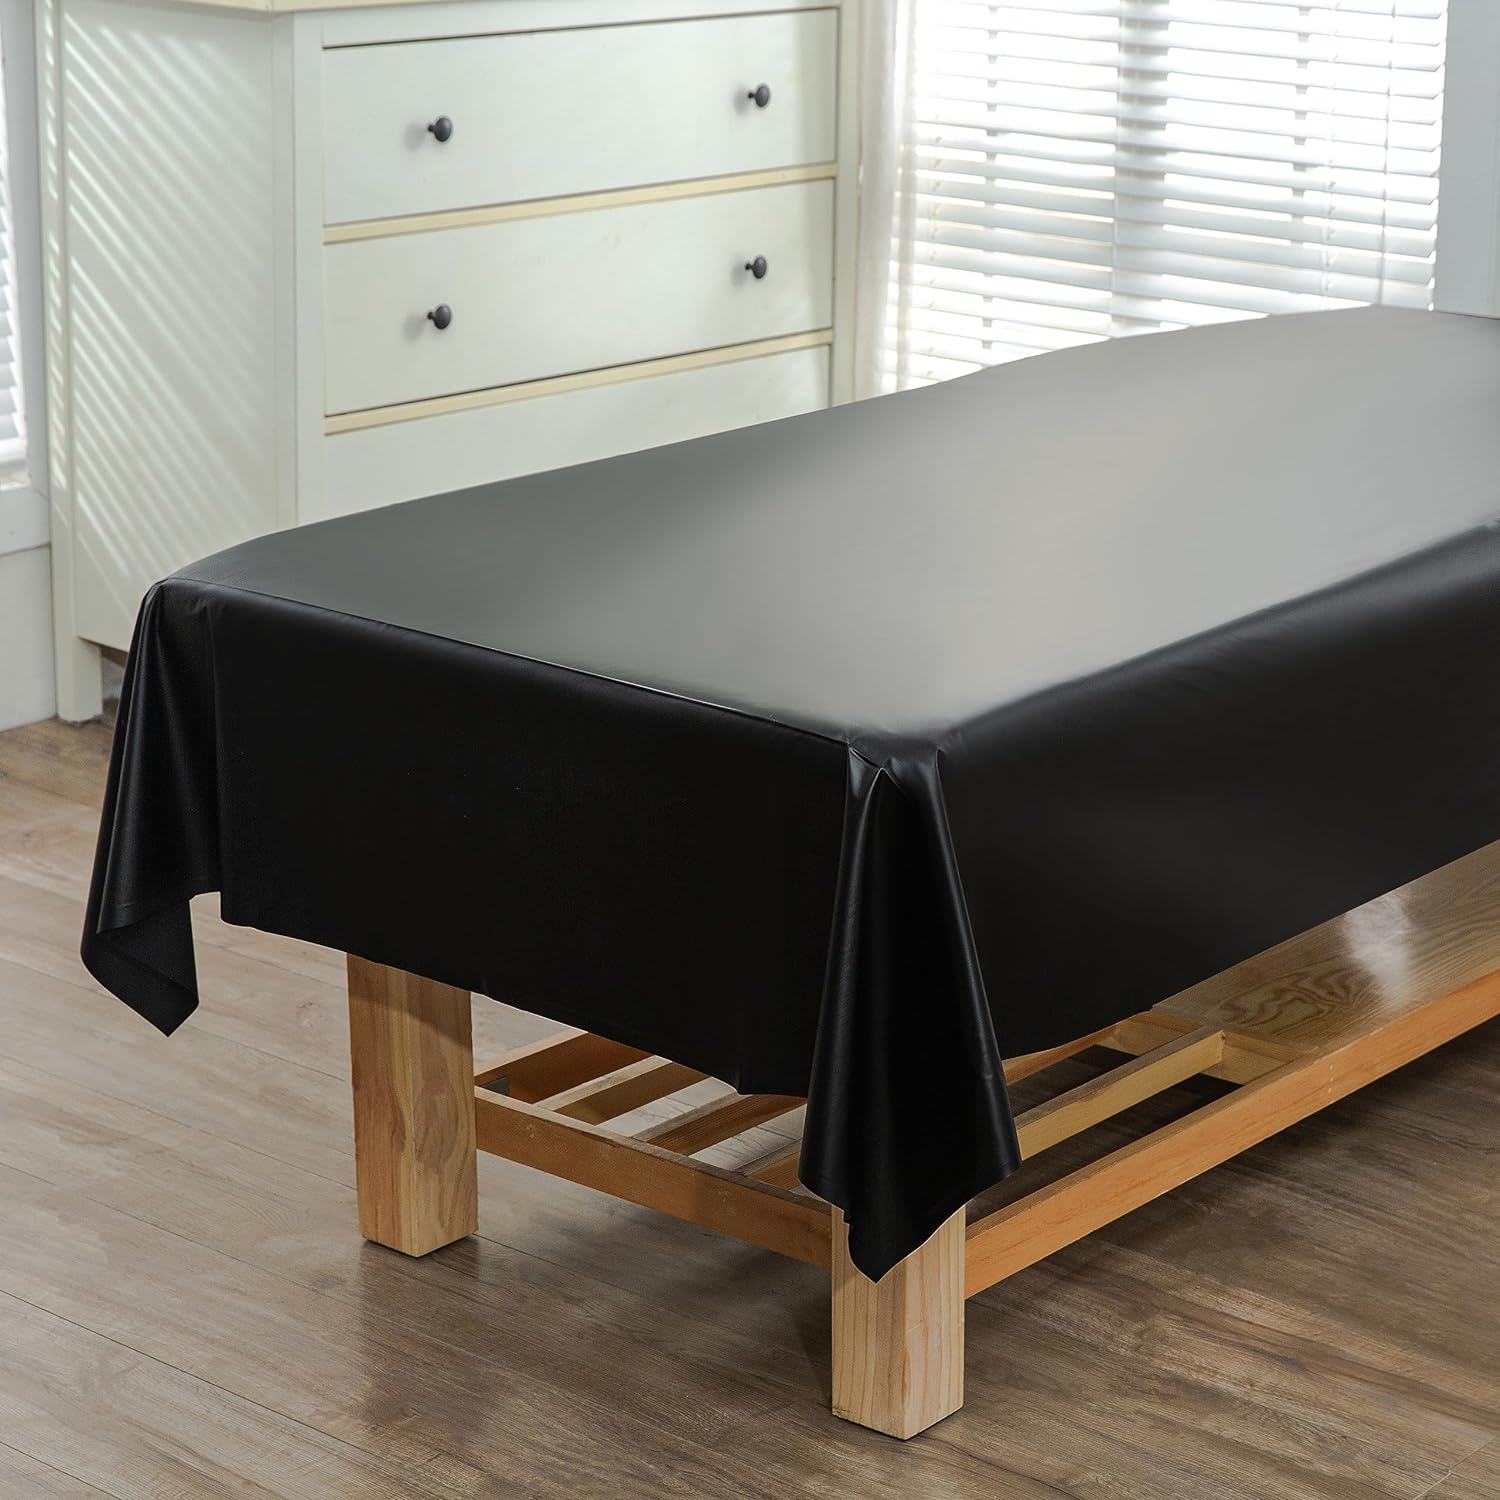 WenBags Massage Table Sheets Durable PVC Waterproof and Oil-proof Protection Cover Sheet for Massage Bed Spa Bed Sheets for Esthetician(51 * 86, Black)